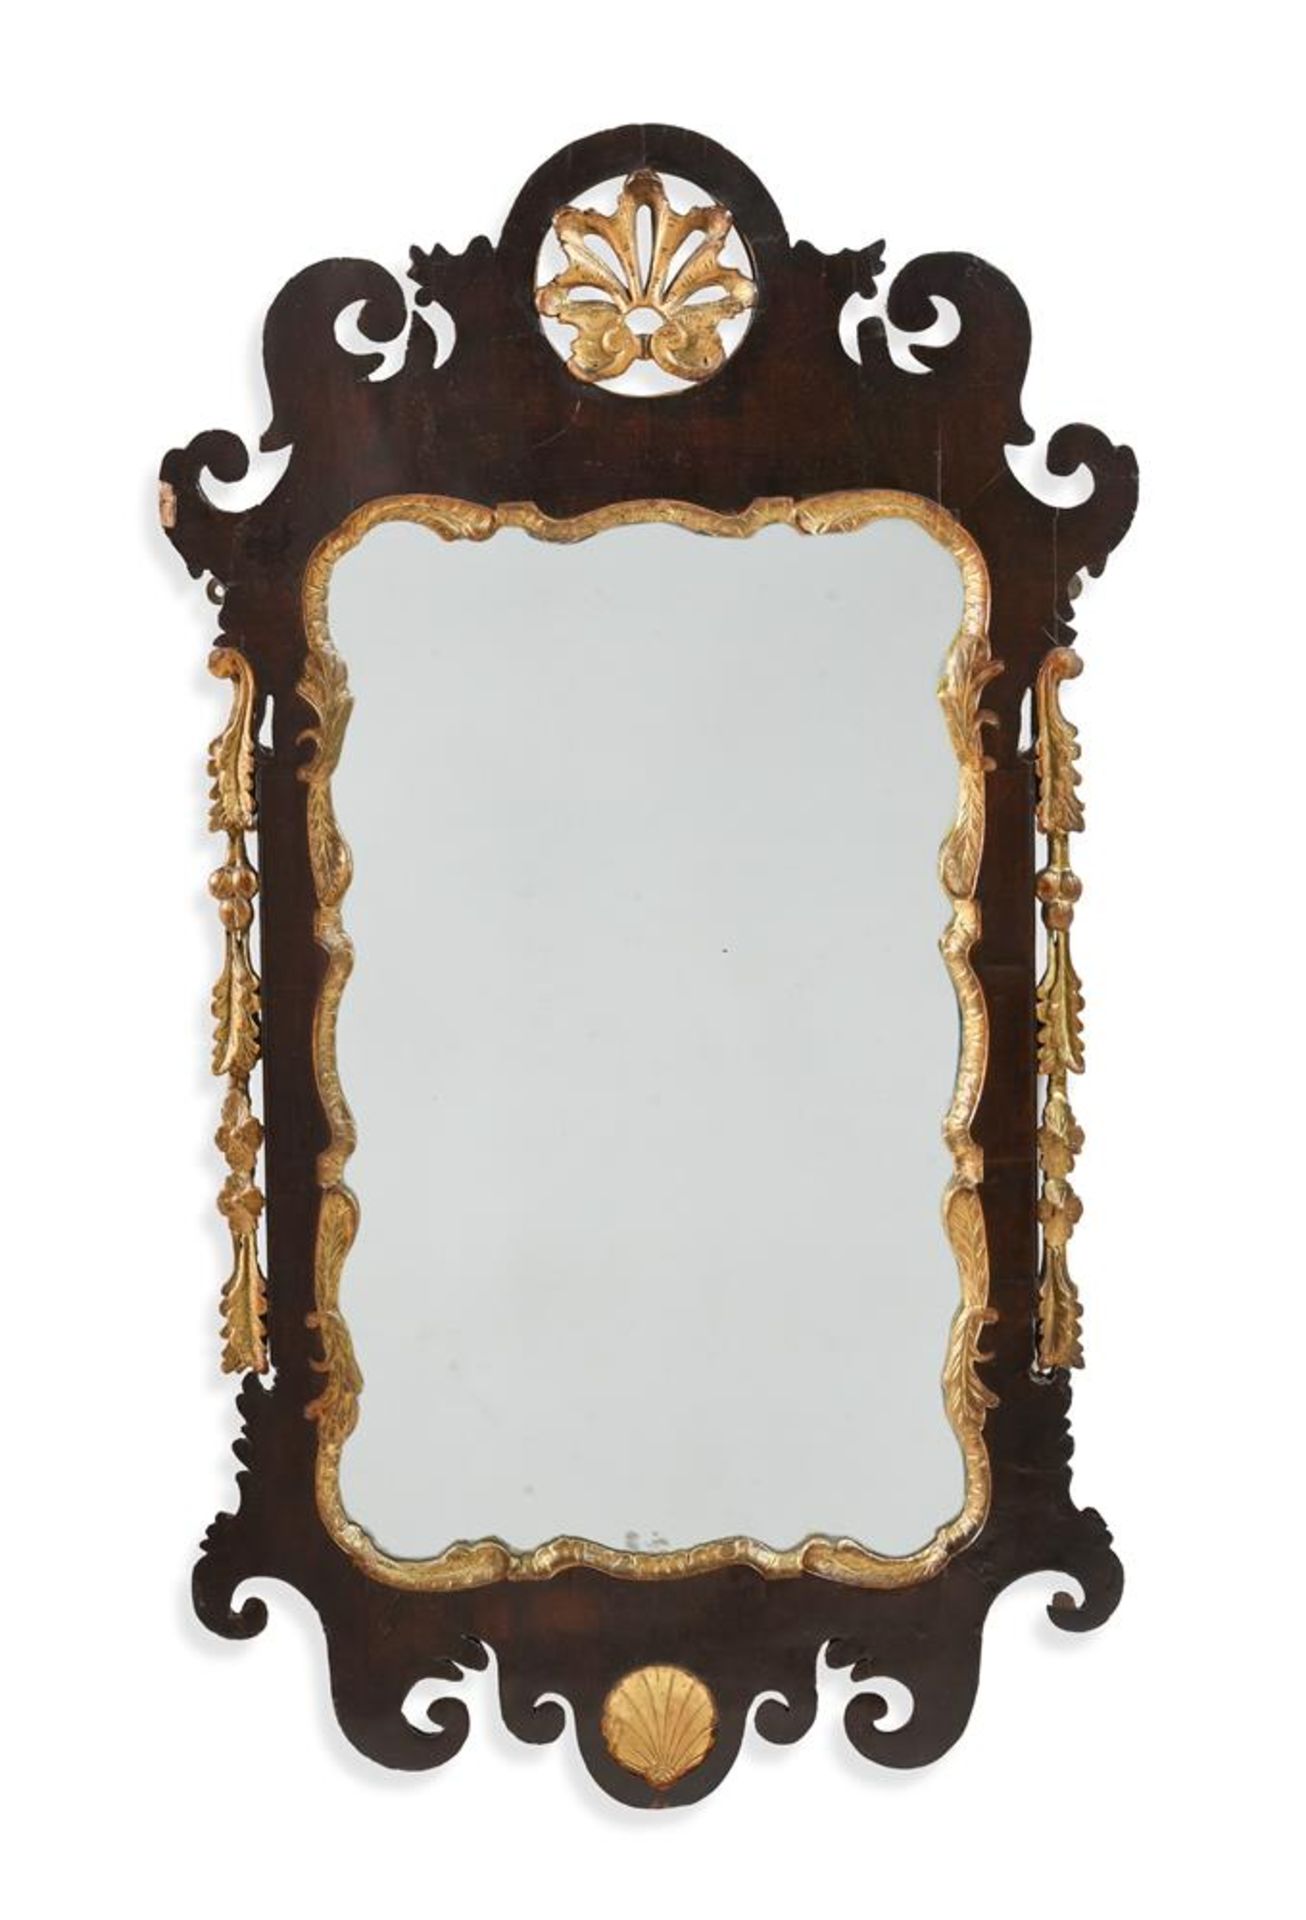 A GEORGE III MAHOGANY AND PARCEL GILT MIRROR